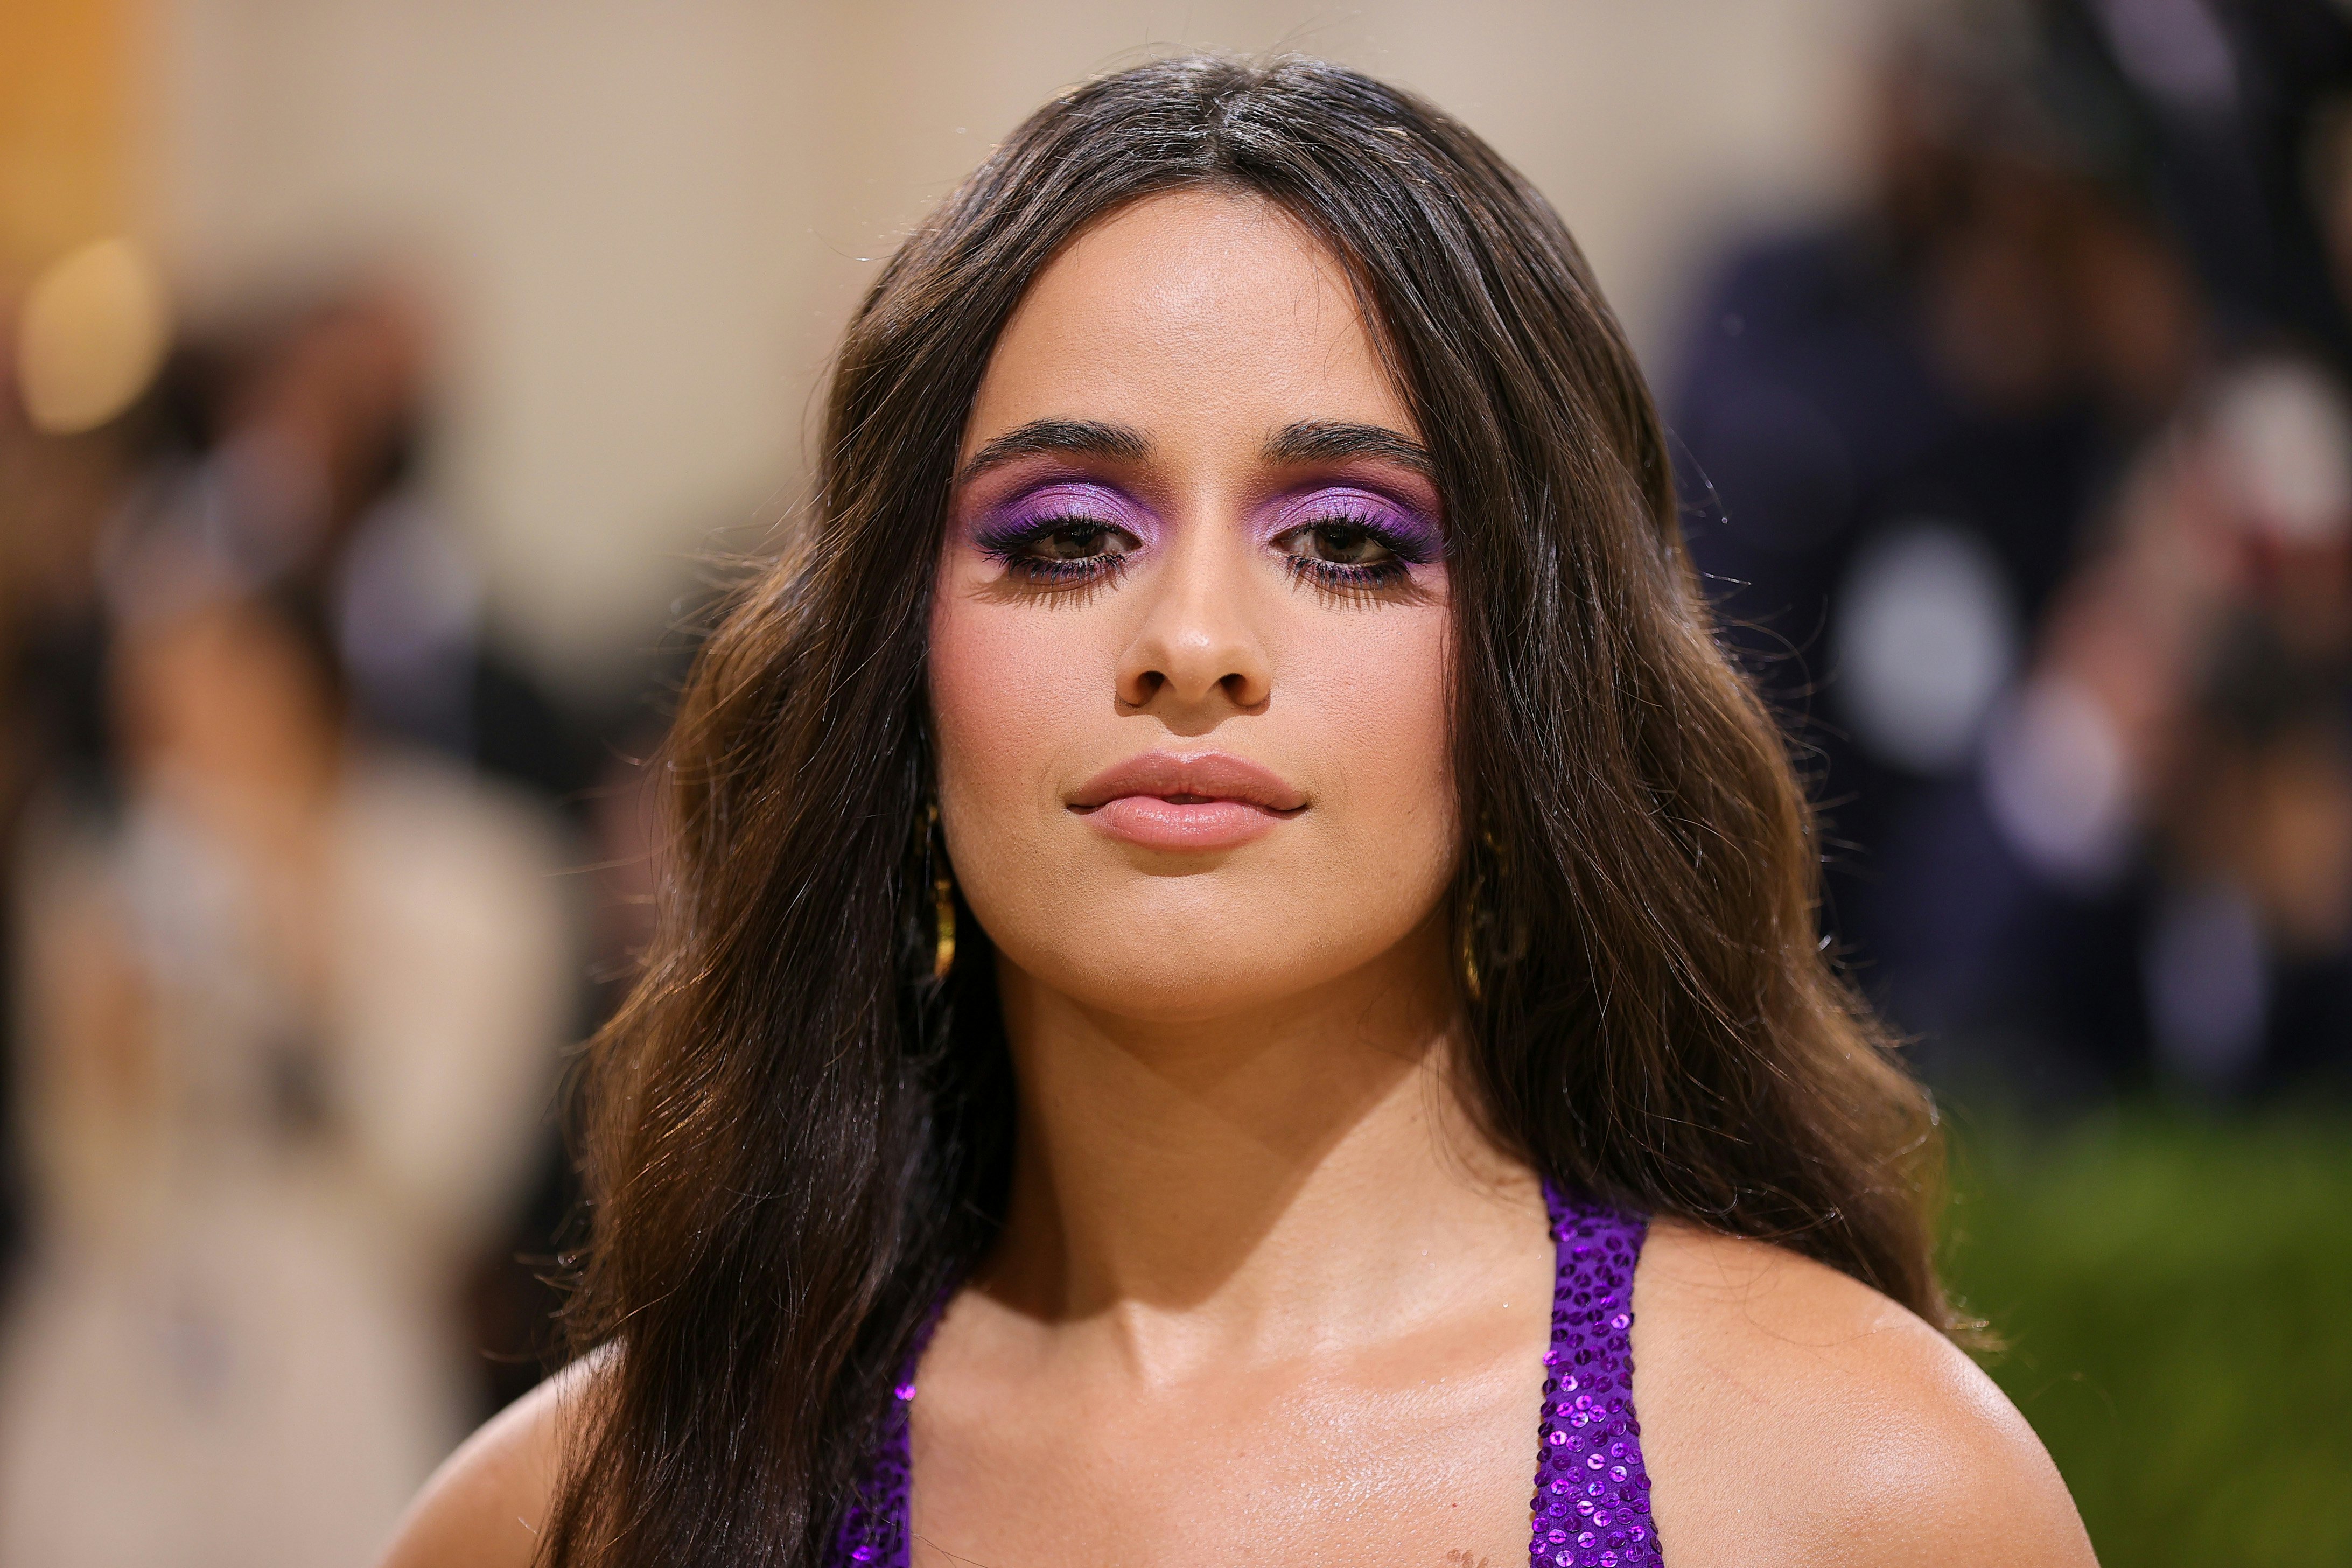 Camila Cabello Debuts Short Hair  See the First Photo Snapped by  Boyfriend Shawn Mendes  Camila Cabello Shawn Mendes  Just Jared  Celebrity News and Gossip  Entertainment